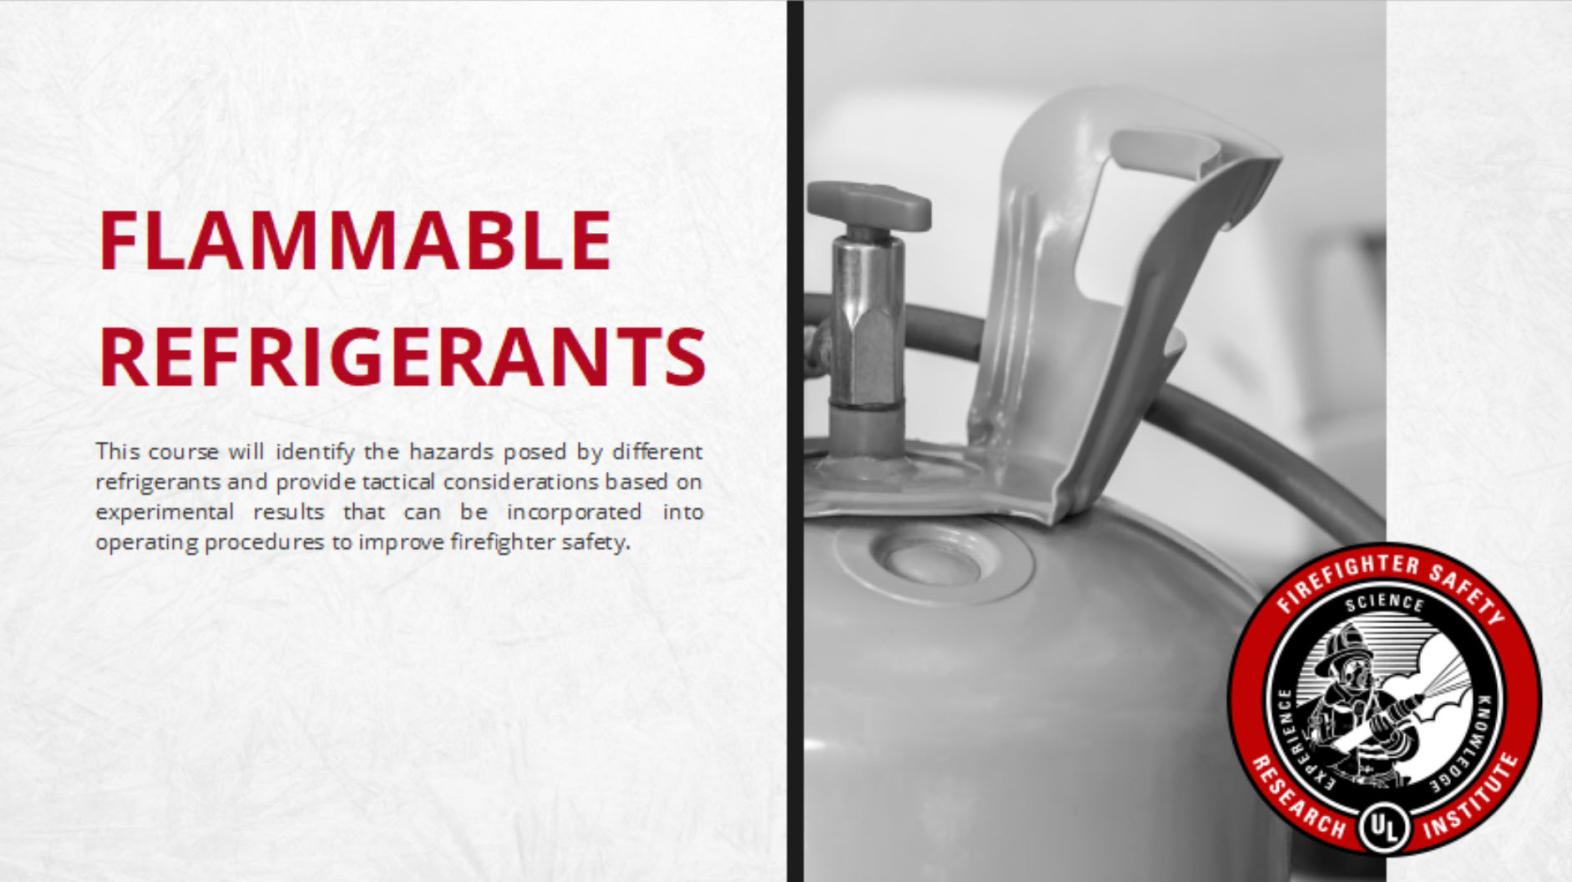 Firefighter Safety and Flammable Refrigerants” online training course